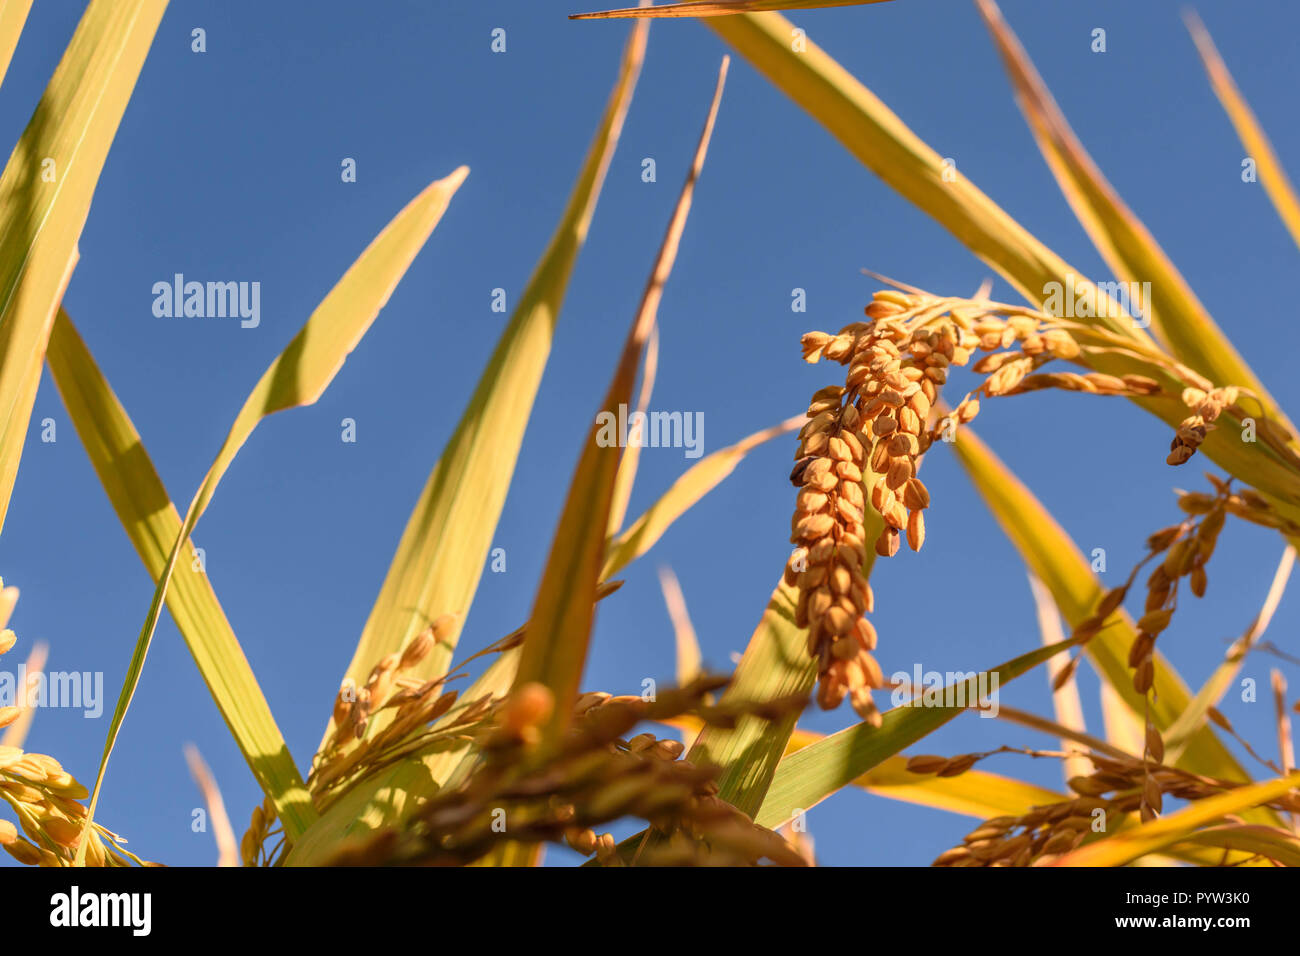 Close up golden Japanese ripe rice and golden leave with blue sky on a sunny day. Stock Photo